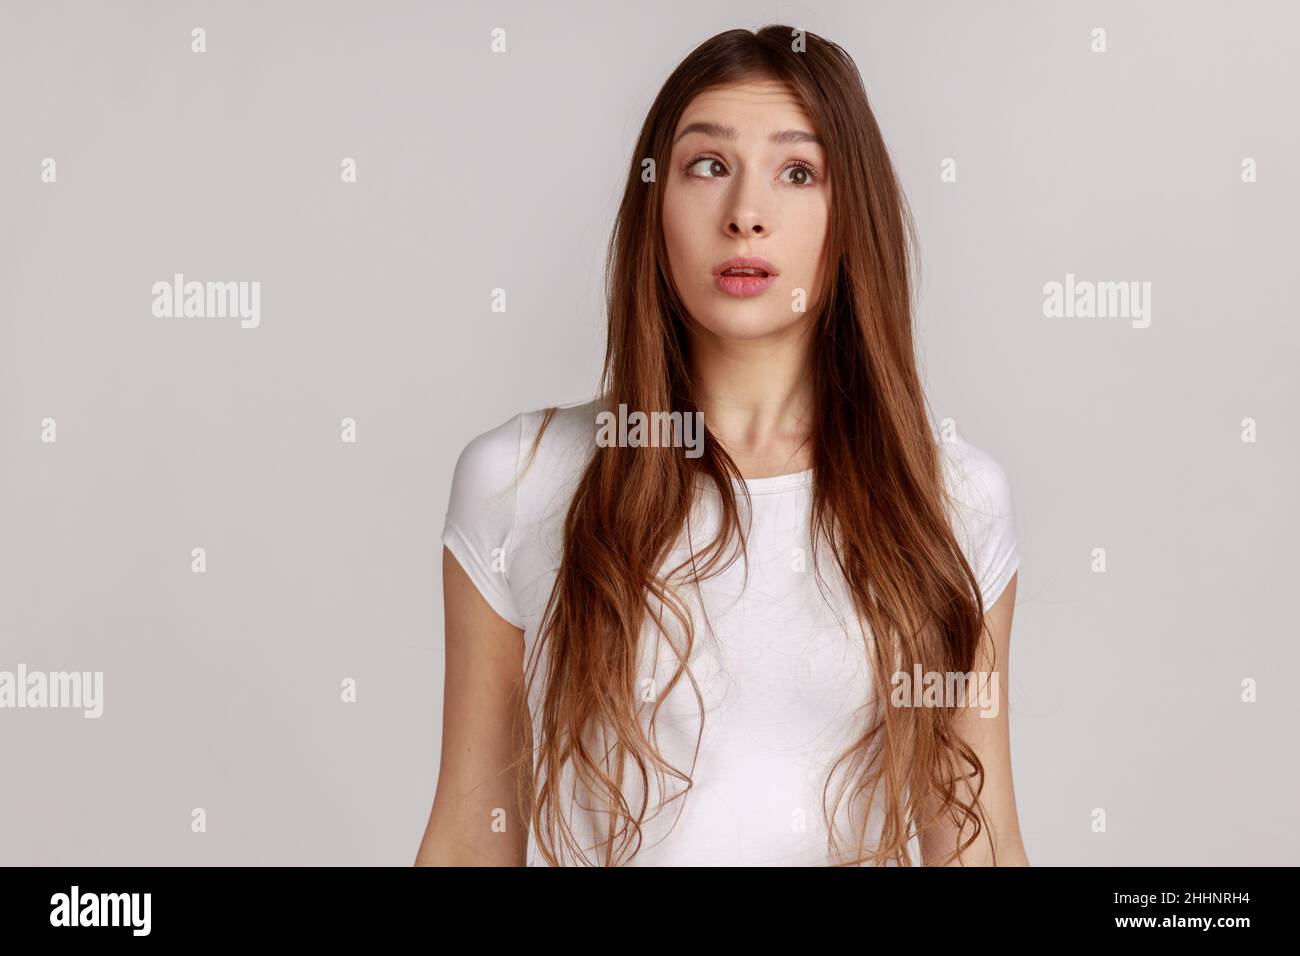 Funny young woman with dark hair making silly comical face with eyes crossed, thinking intensely looking dumb and confused, wearing white T-shirt. Indoor studio shot isolated on gray background. Stock Photo